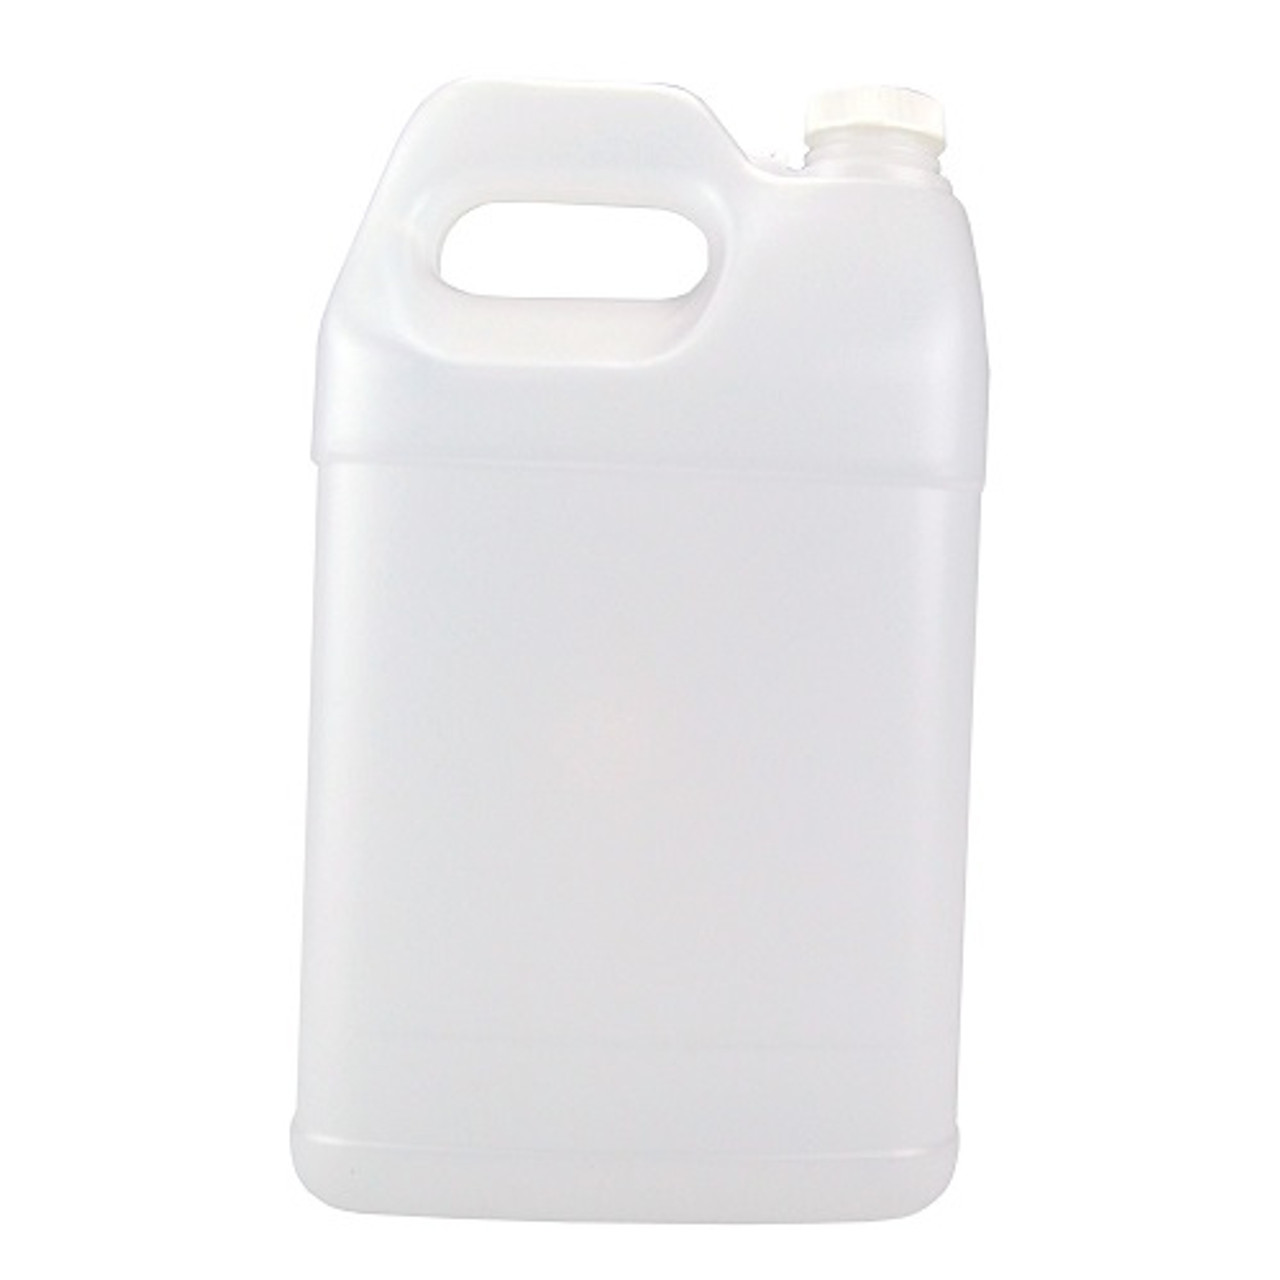 Hudson Exchange 1 Gallon F-Style Plastic Jug with Cap, HDPE, Natural, 6 Pack